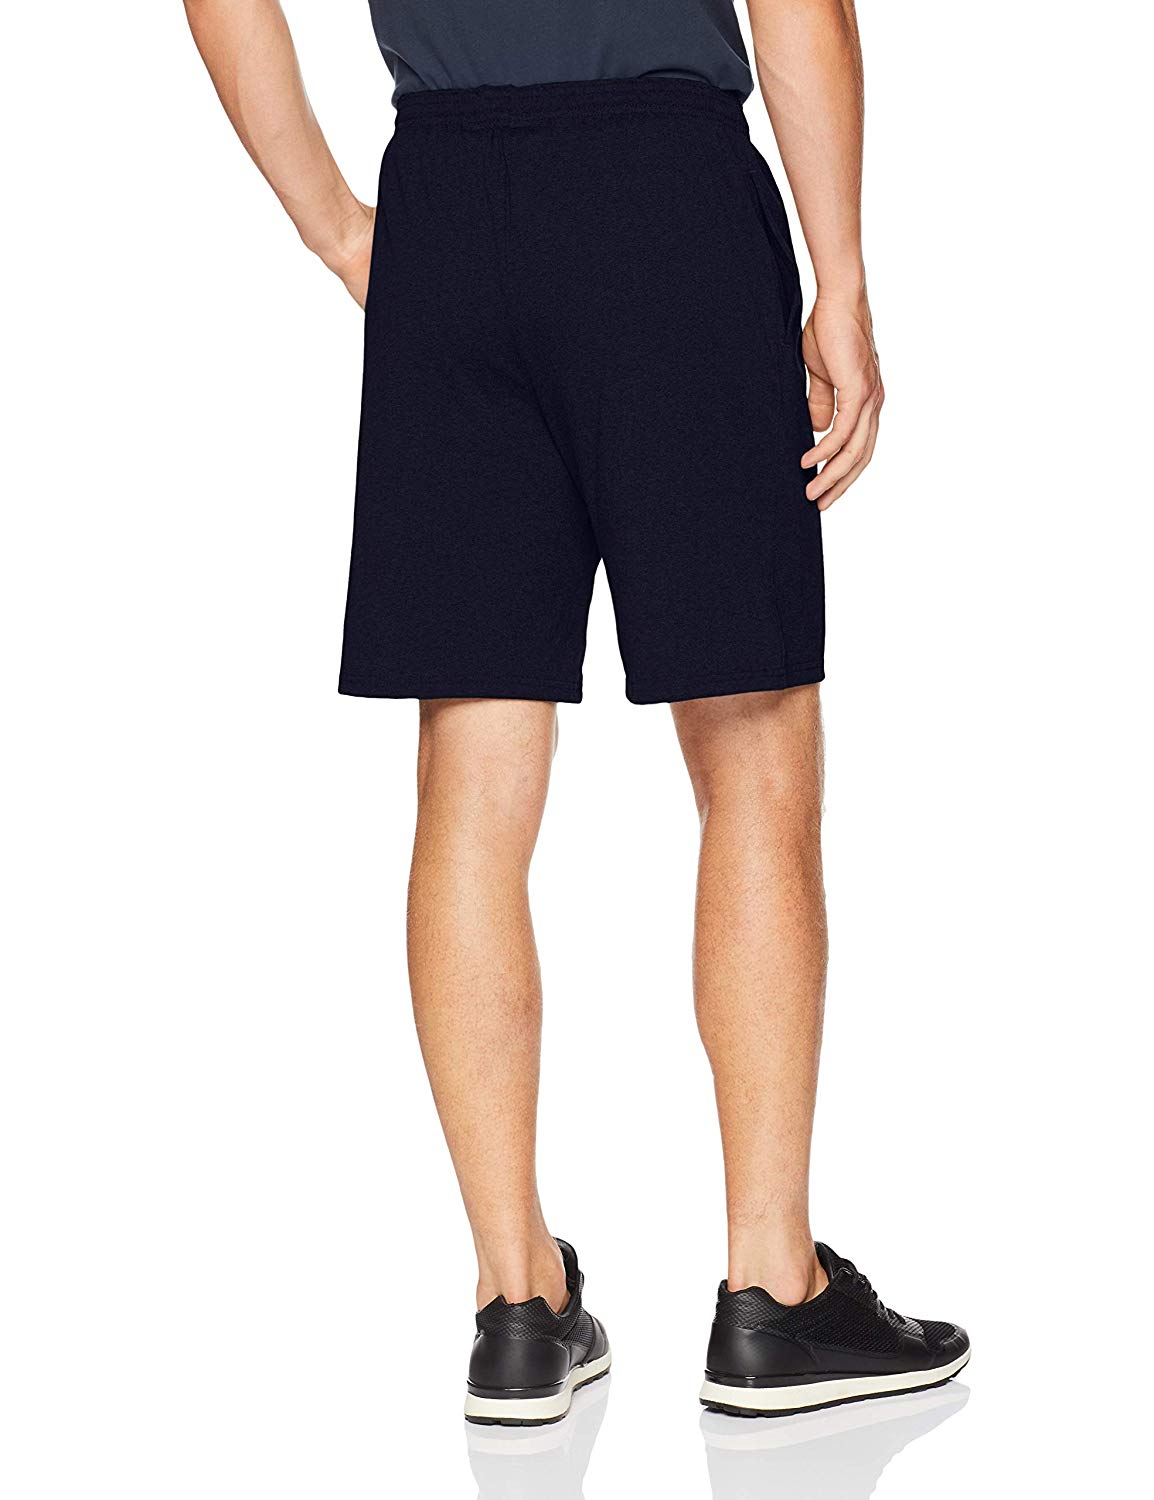 Champion Men's Jersey Short With Pockets, Navy, Large, Navy, Size Large ...